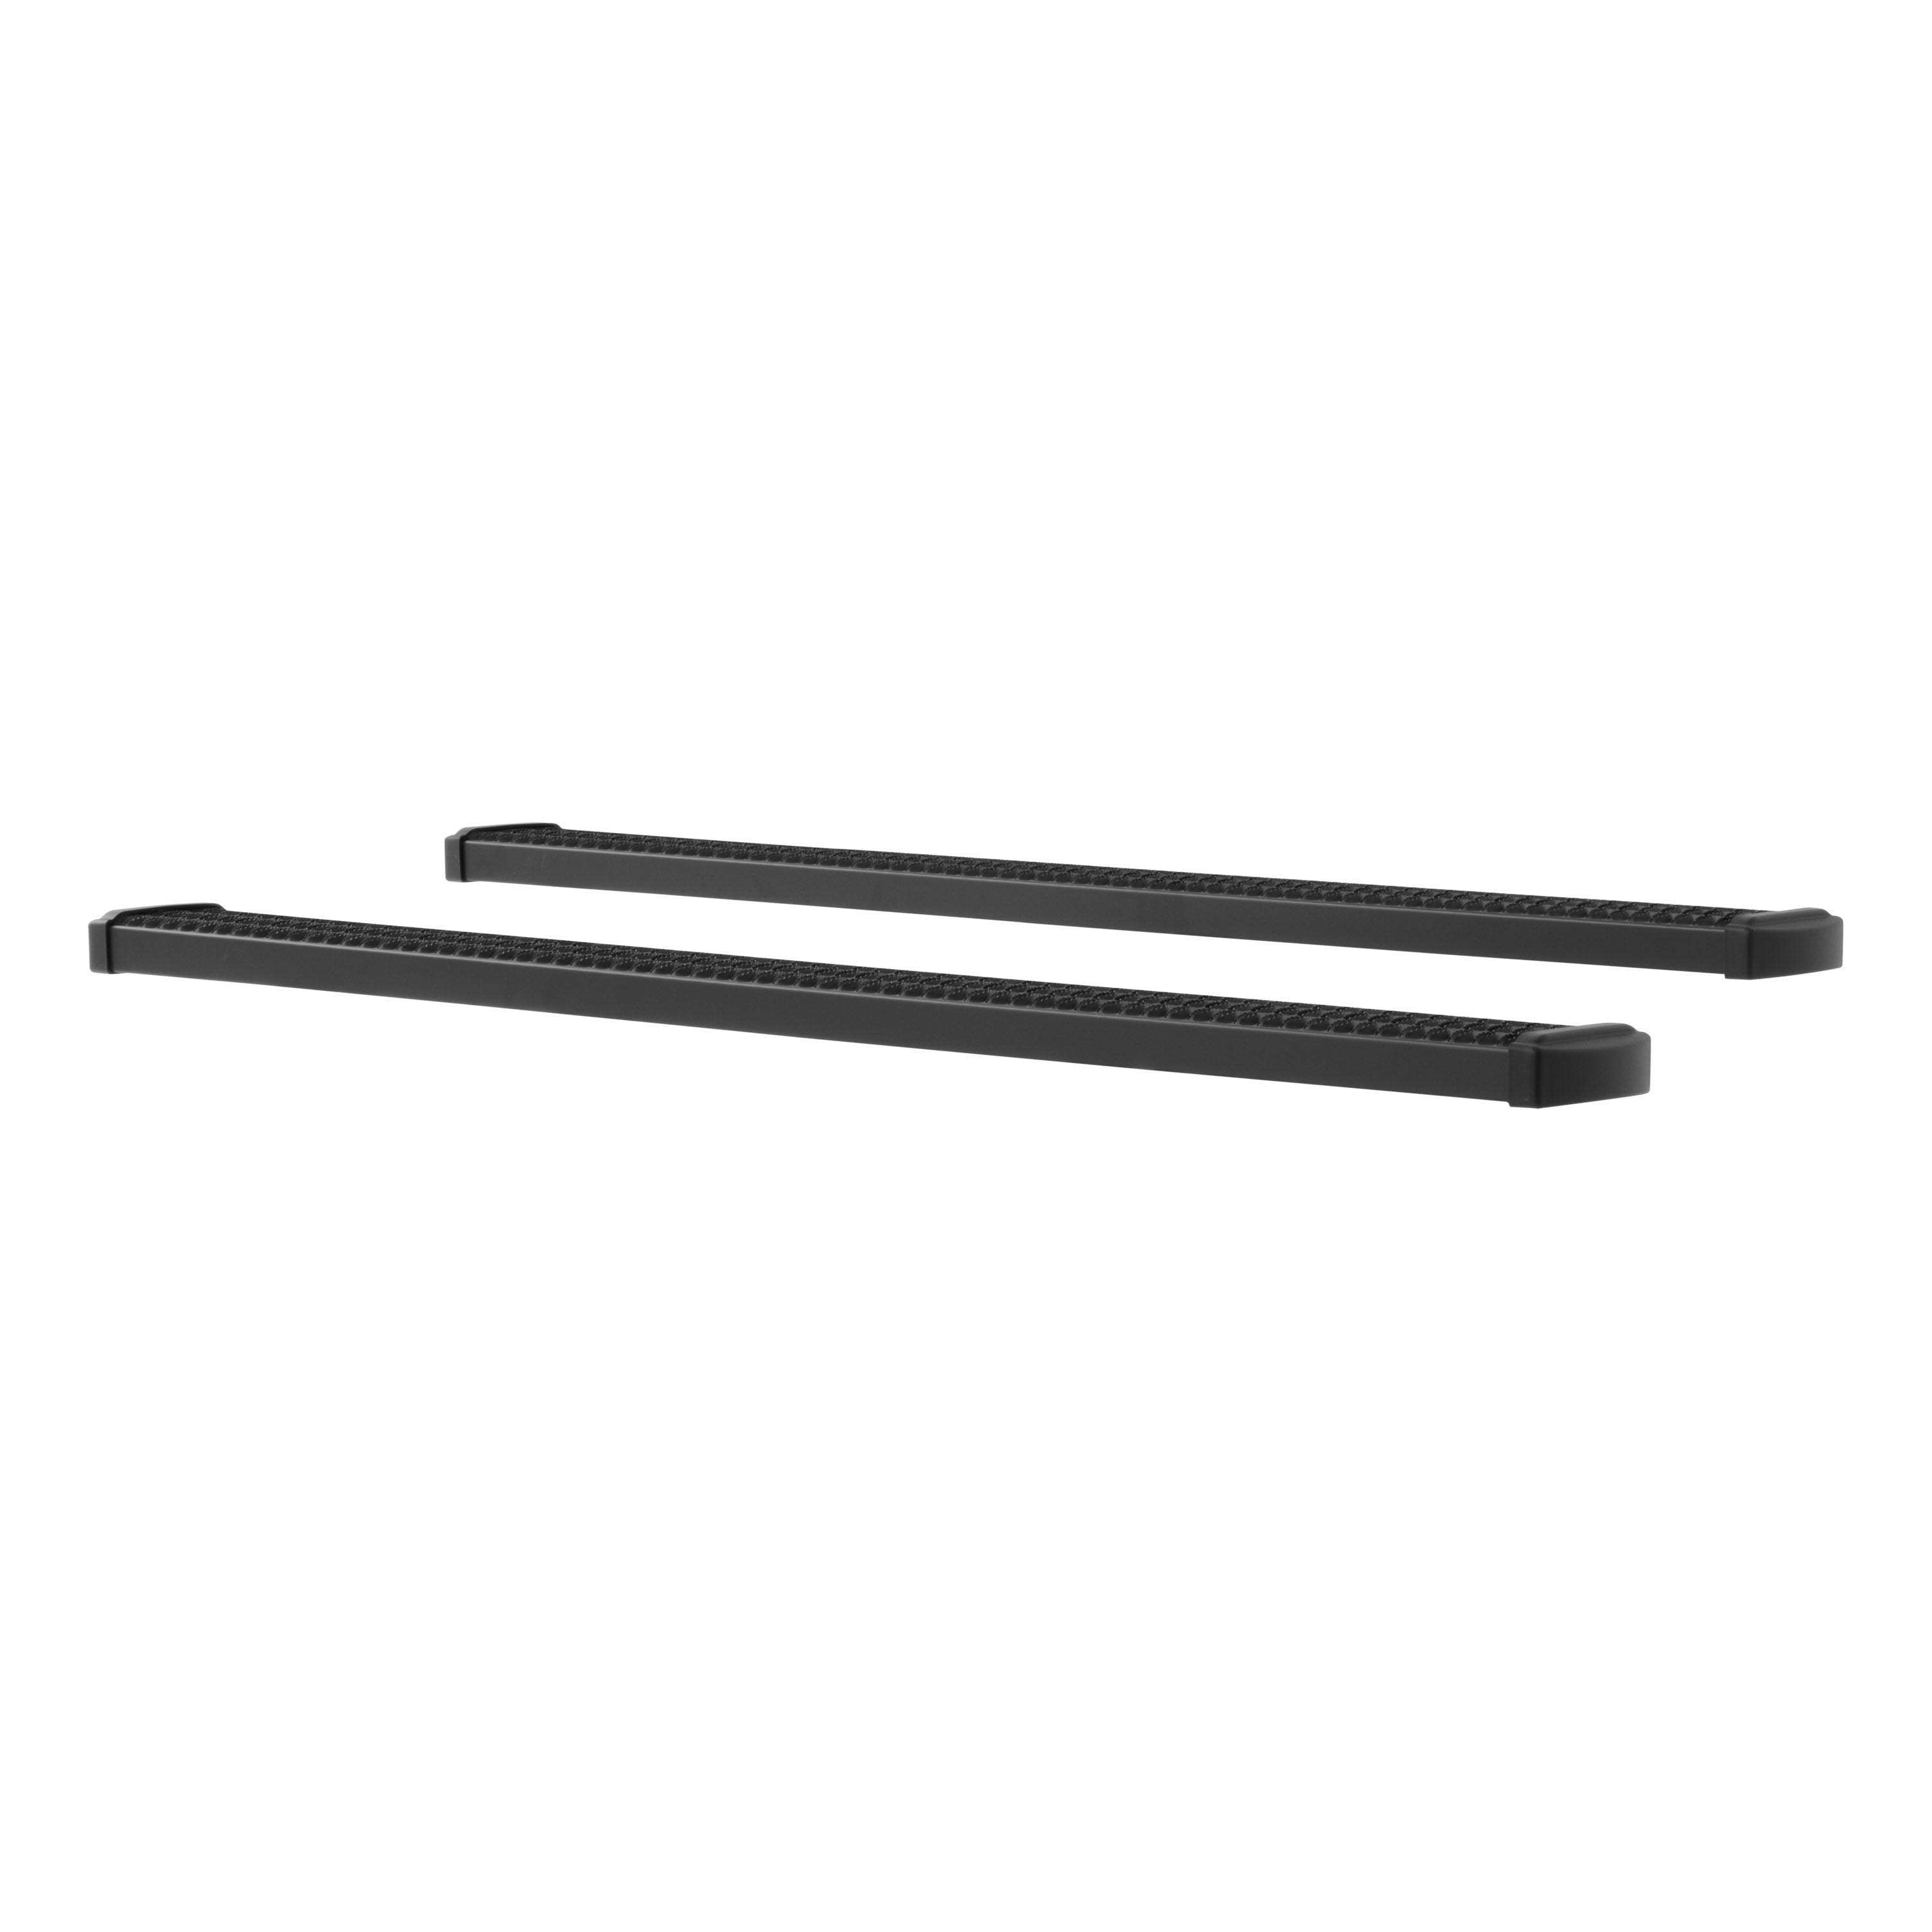 LUVERNE 415078-401113 Grip Step 7 inch Running Boards